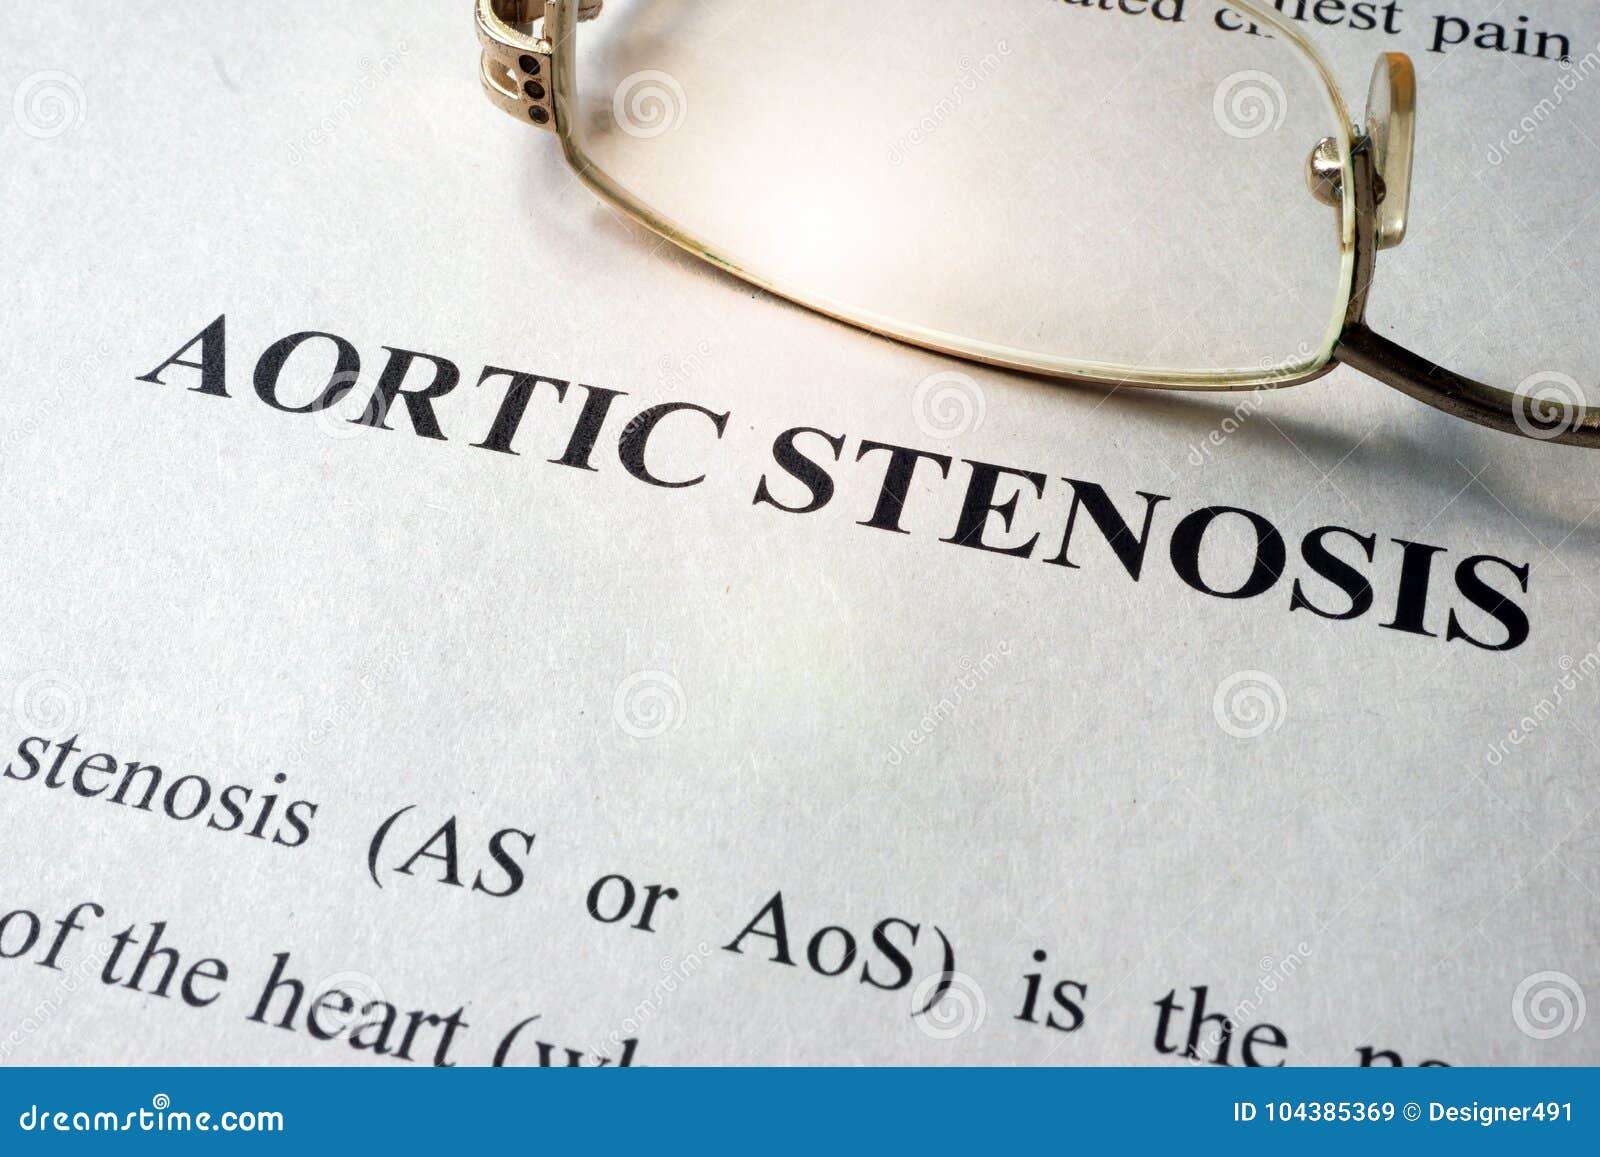 page with title aortic stenosis and glasses.